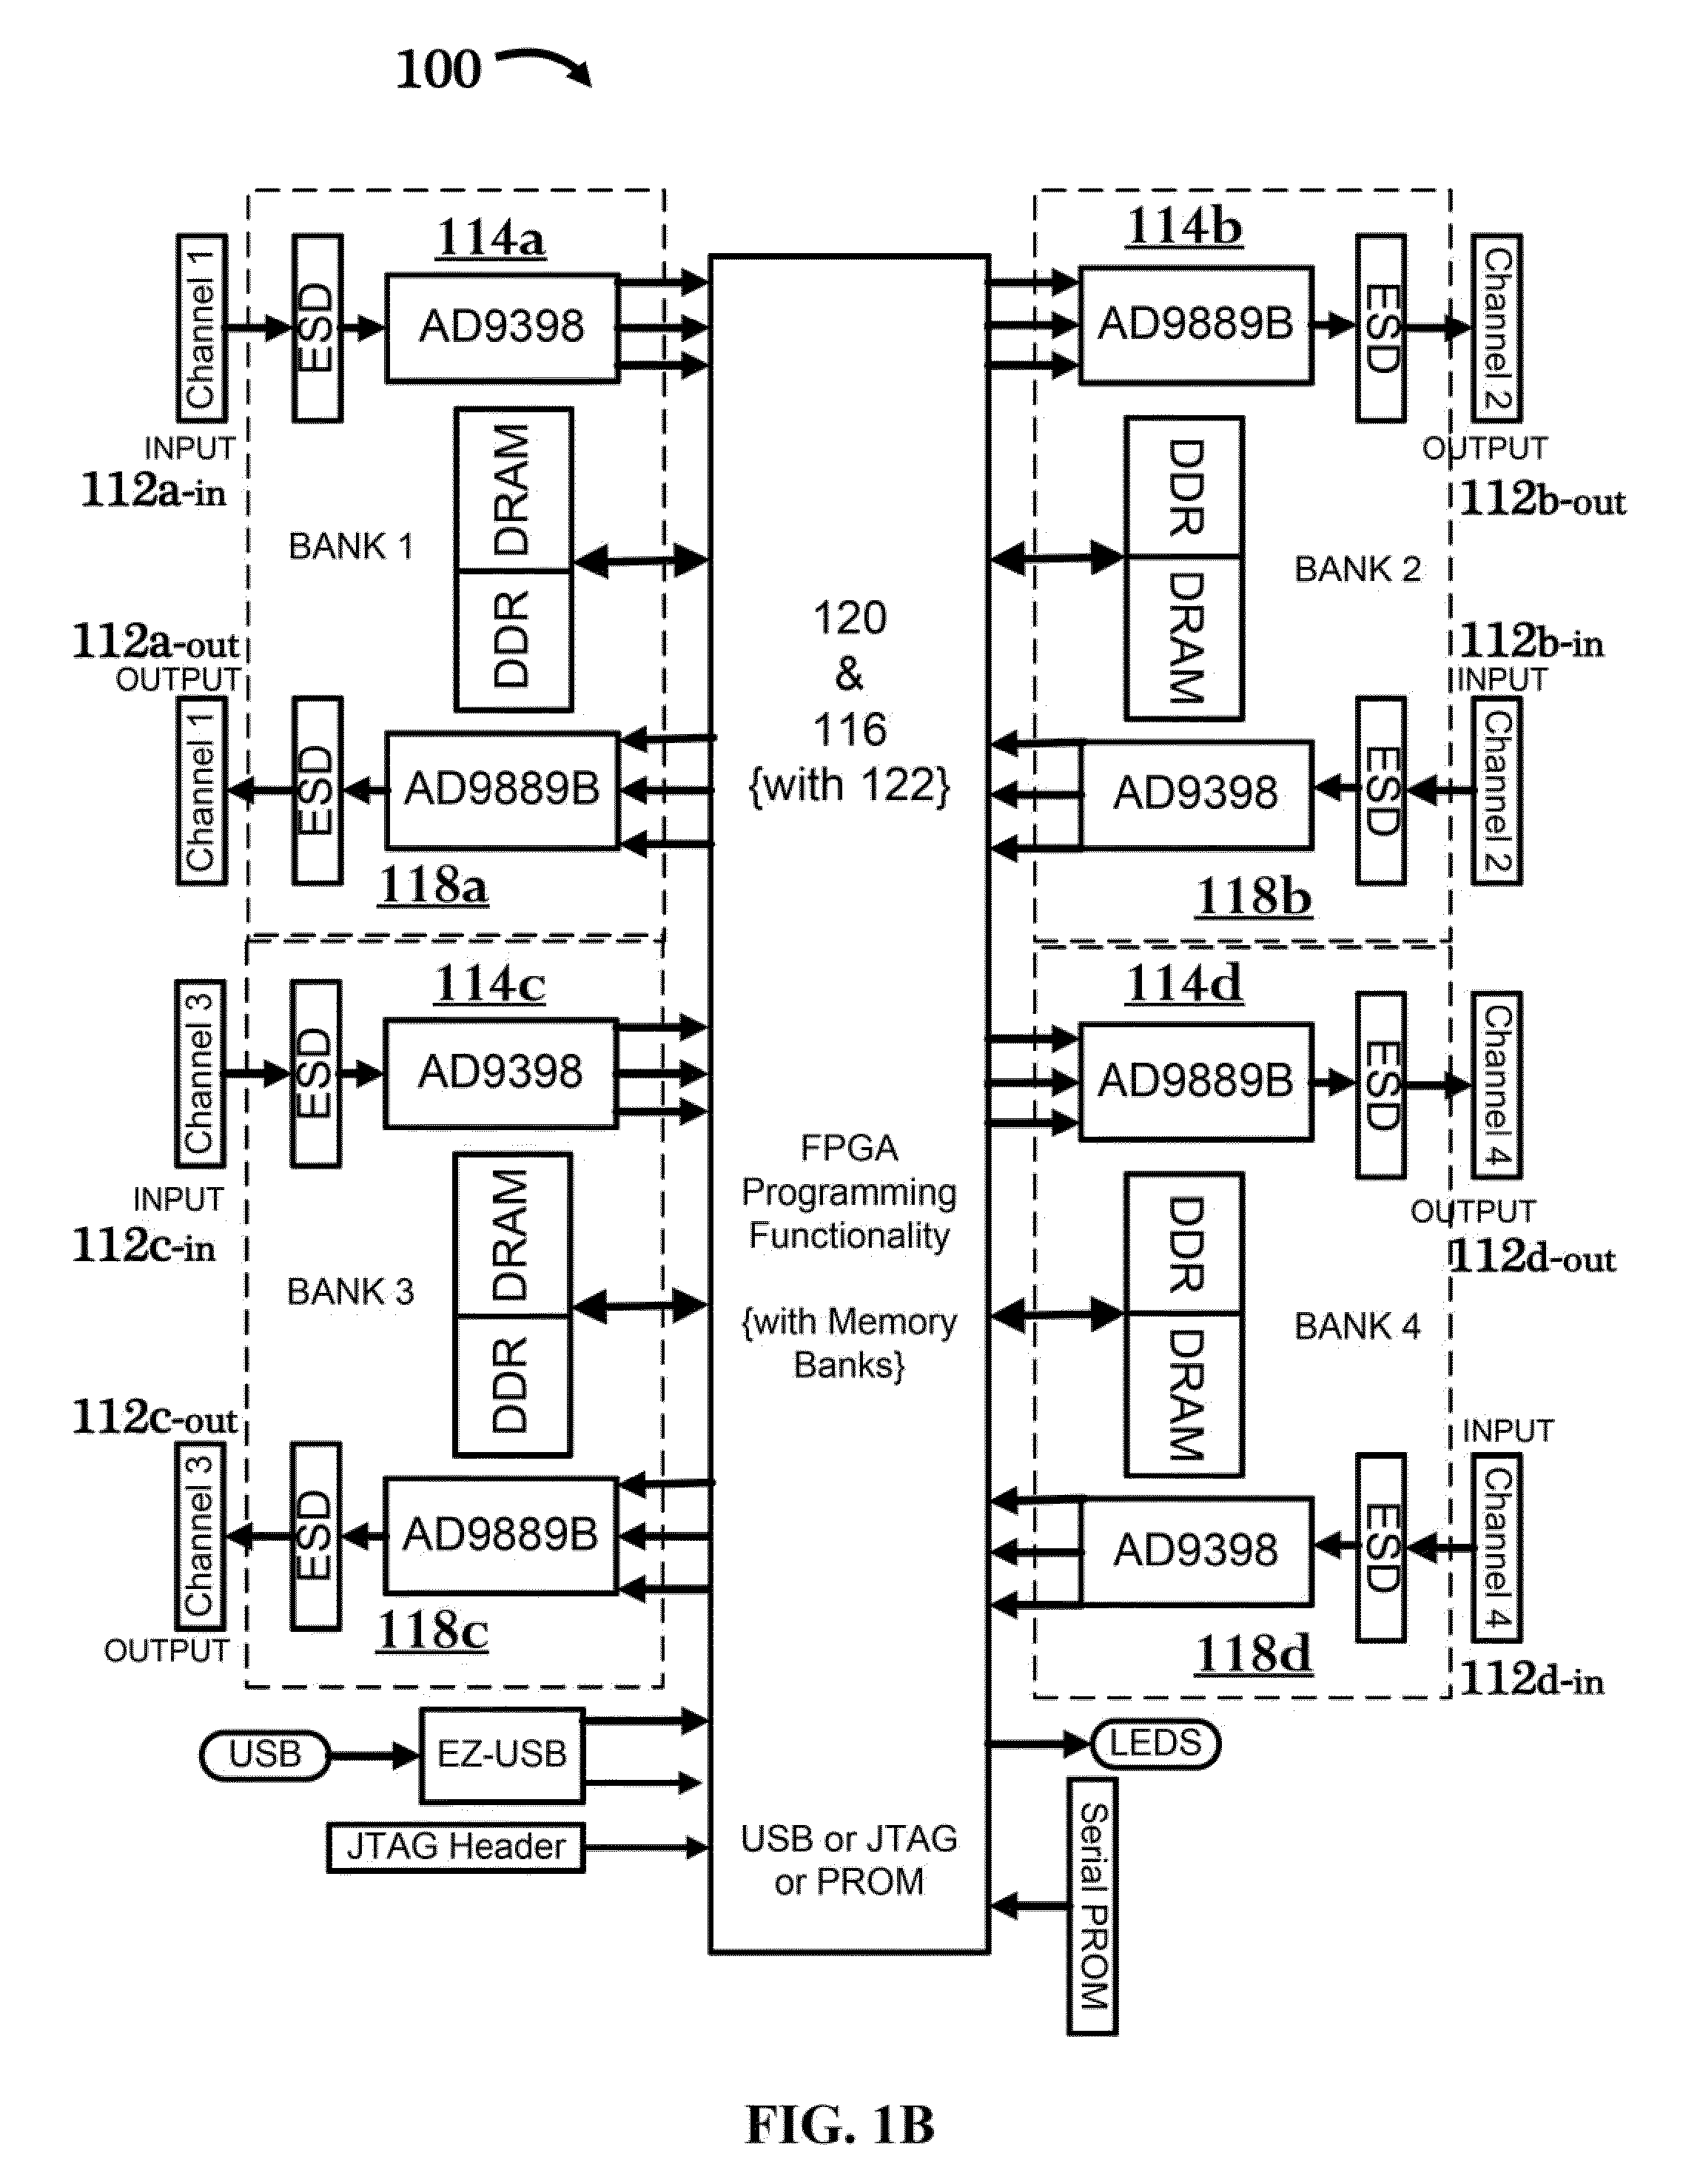 Source and output device-independent pixel compositor device adapted to incorporate the digital visual interface (DVI)